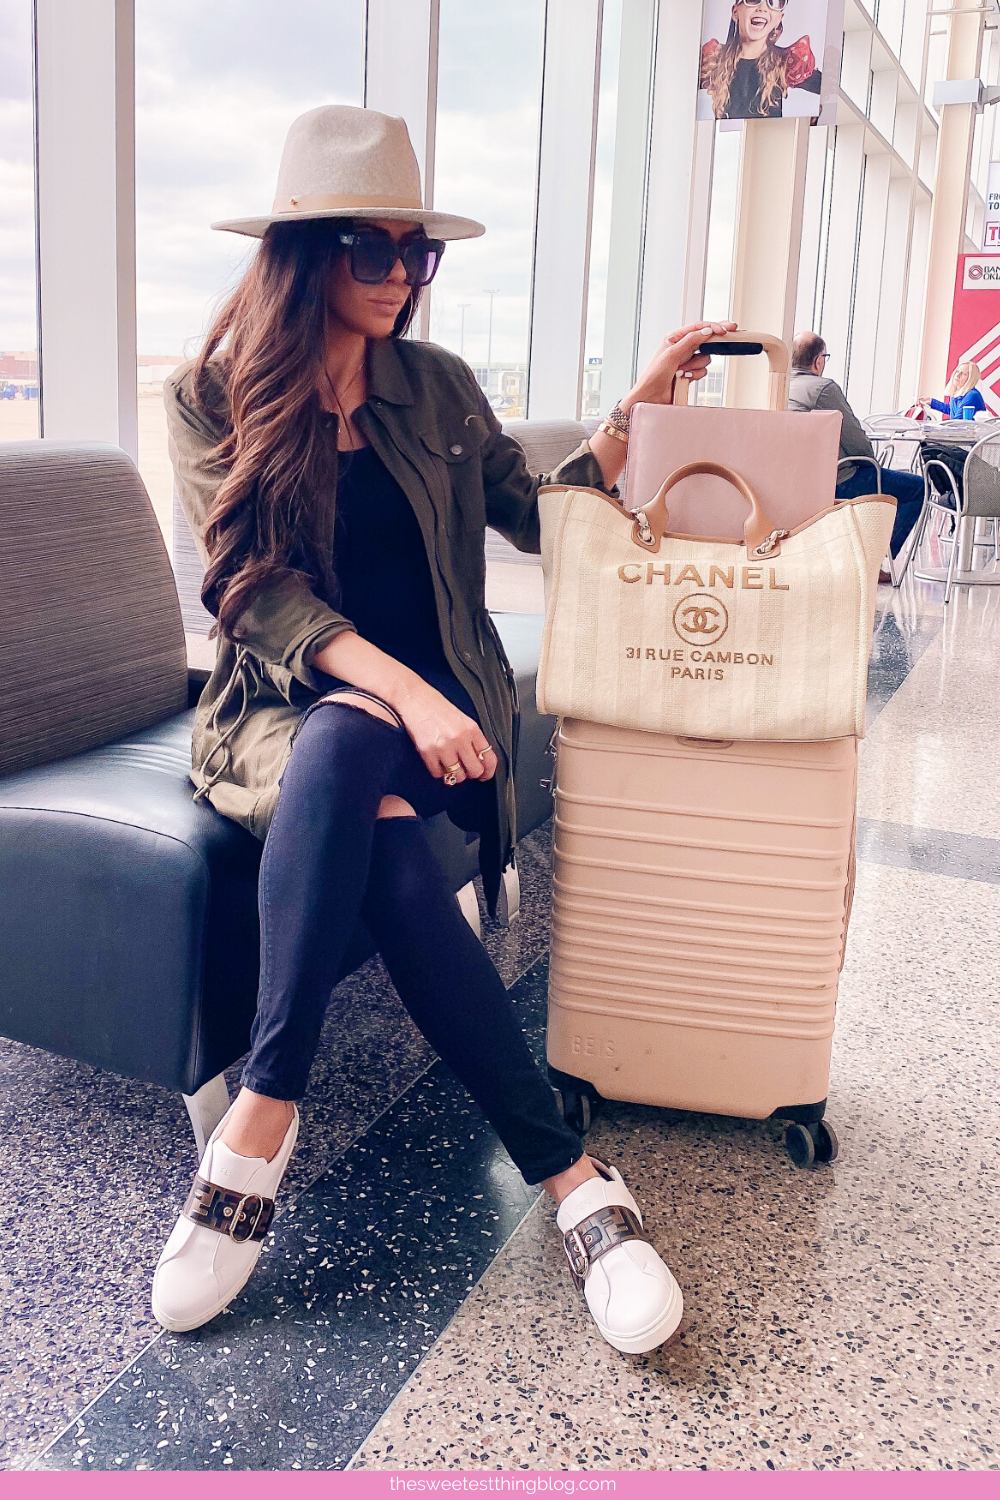 Cute Airport Travel Outfit By Emily Ann Gemma - Cute Airport Travel Outfit By Emily Ann Gemma -   11 airport style Summer ideas